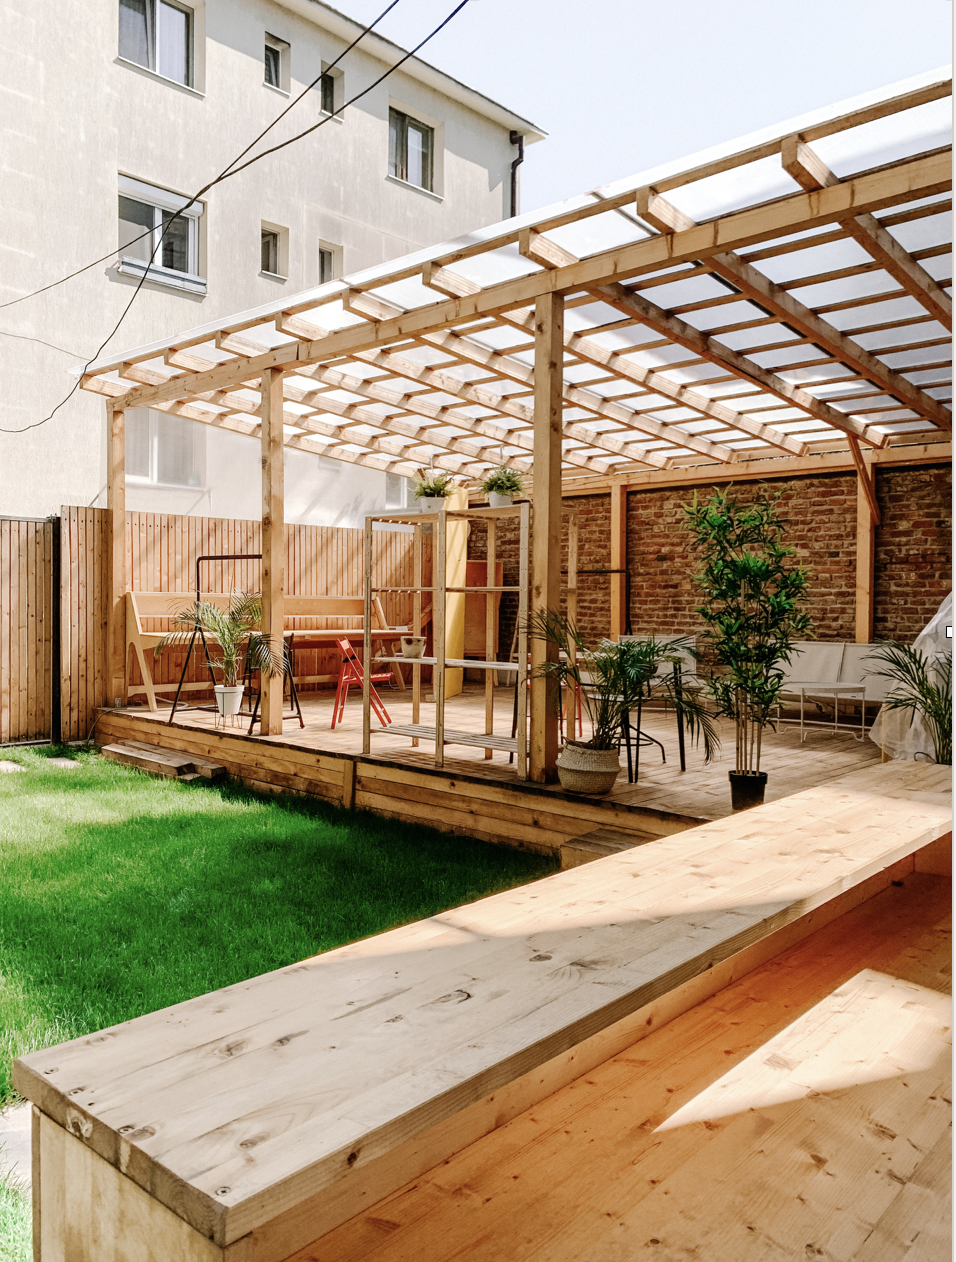 using arbors and pergolas to add shade and interest in the garden